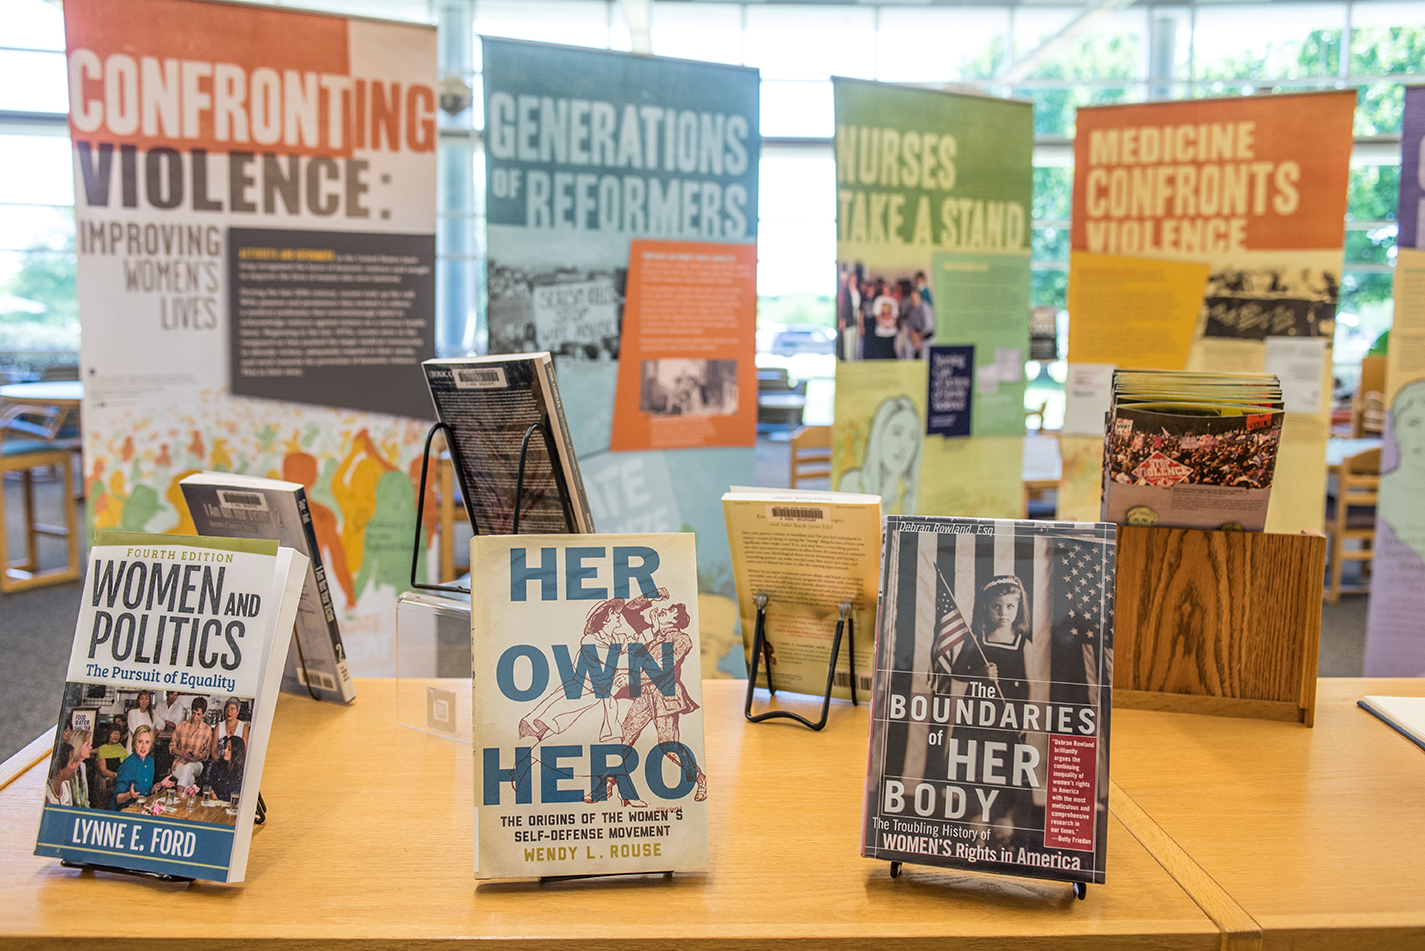 Confronting Violence: Improving Women’s Lives explores images, manuscripts and records that show the campaign for change for the lives of battered women.